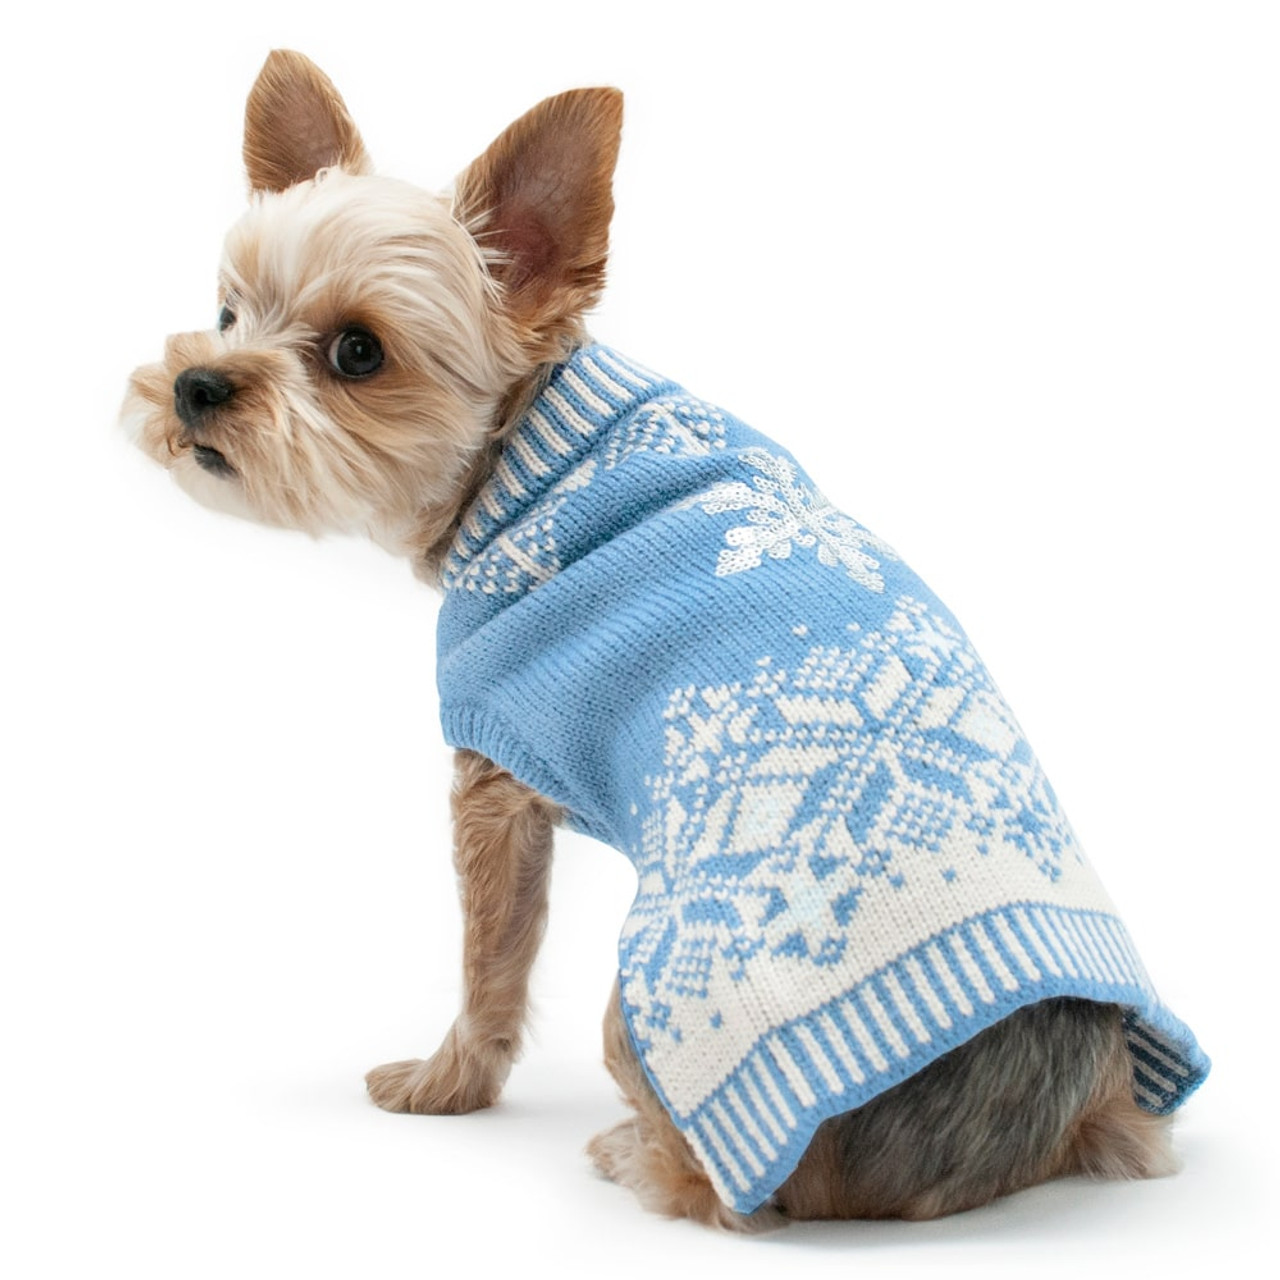 https://cdn11.bigcommerce.com/s-zy7iaurt44/images/stencil/1280x1280/products/1402/4775/Puppy_wearing_Dog_Sweater_-_Shiny_Snow_Flake__24955.1631693585.jpg?c=2